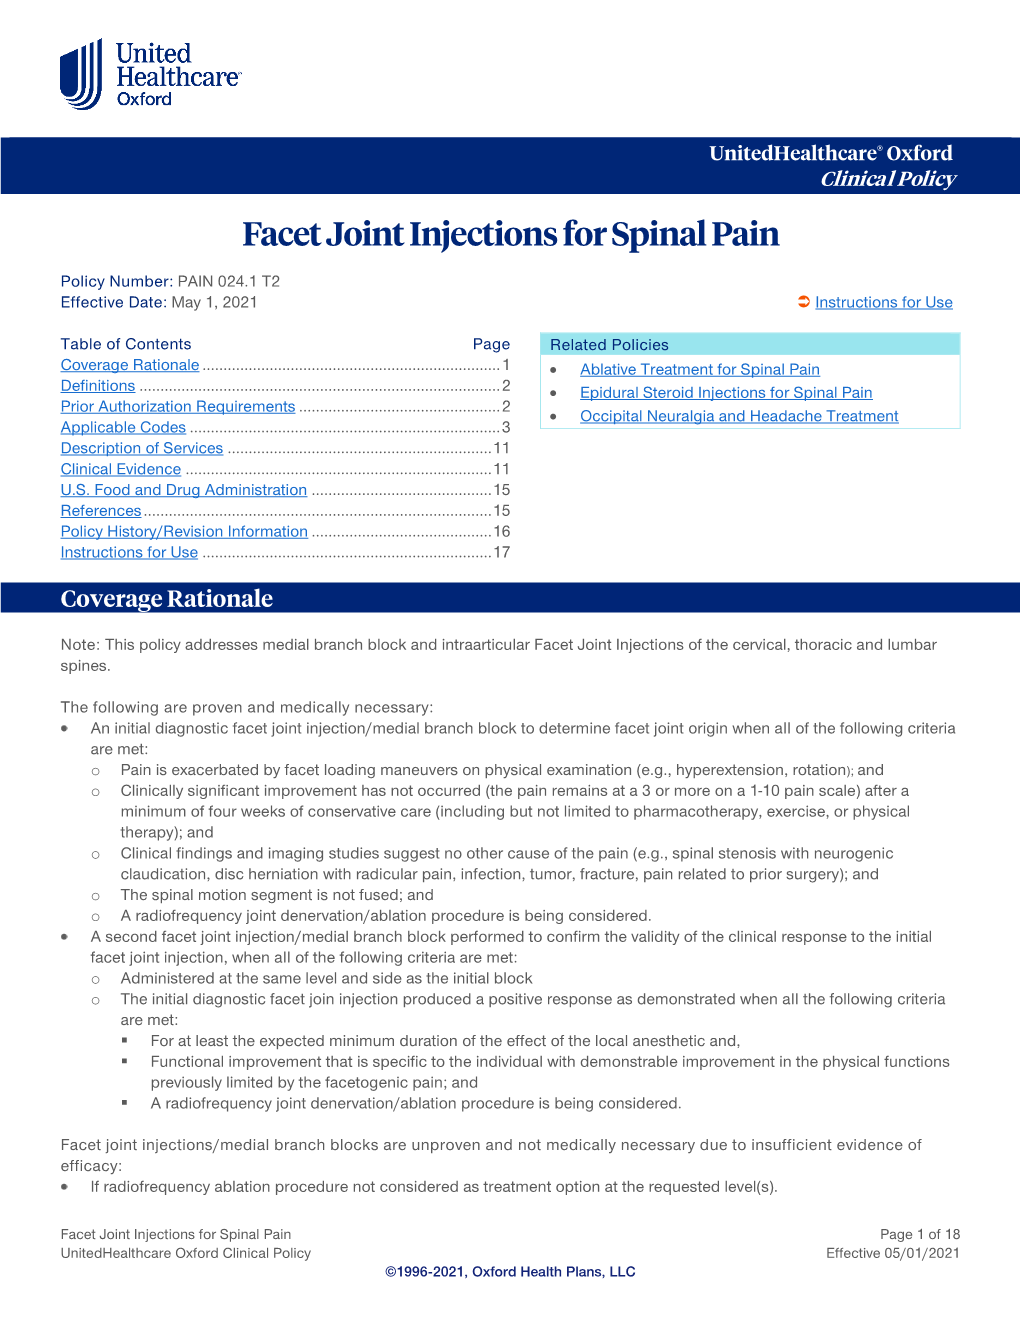 Facet Joint Injections for Spinal Pain